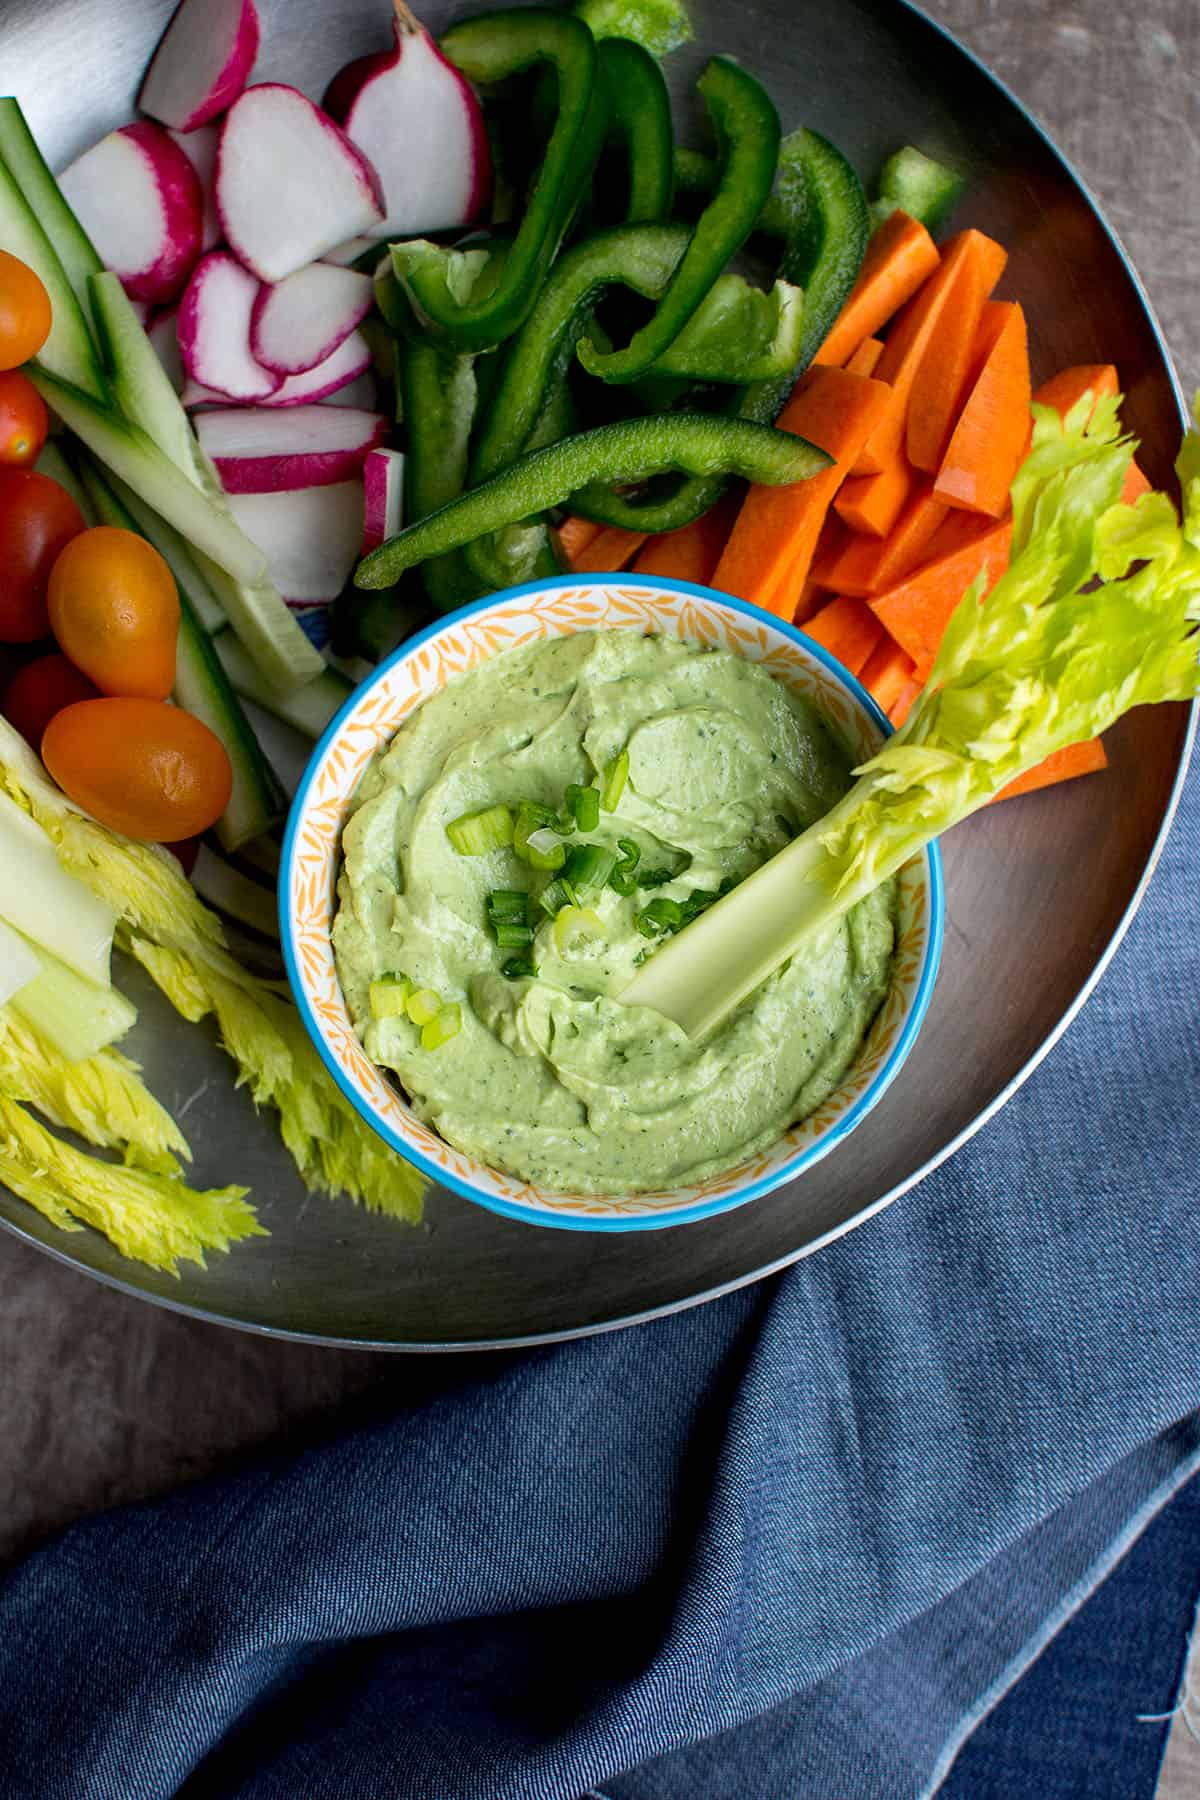 Tray with veggies and bowl of dip.